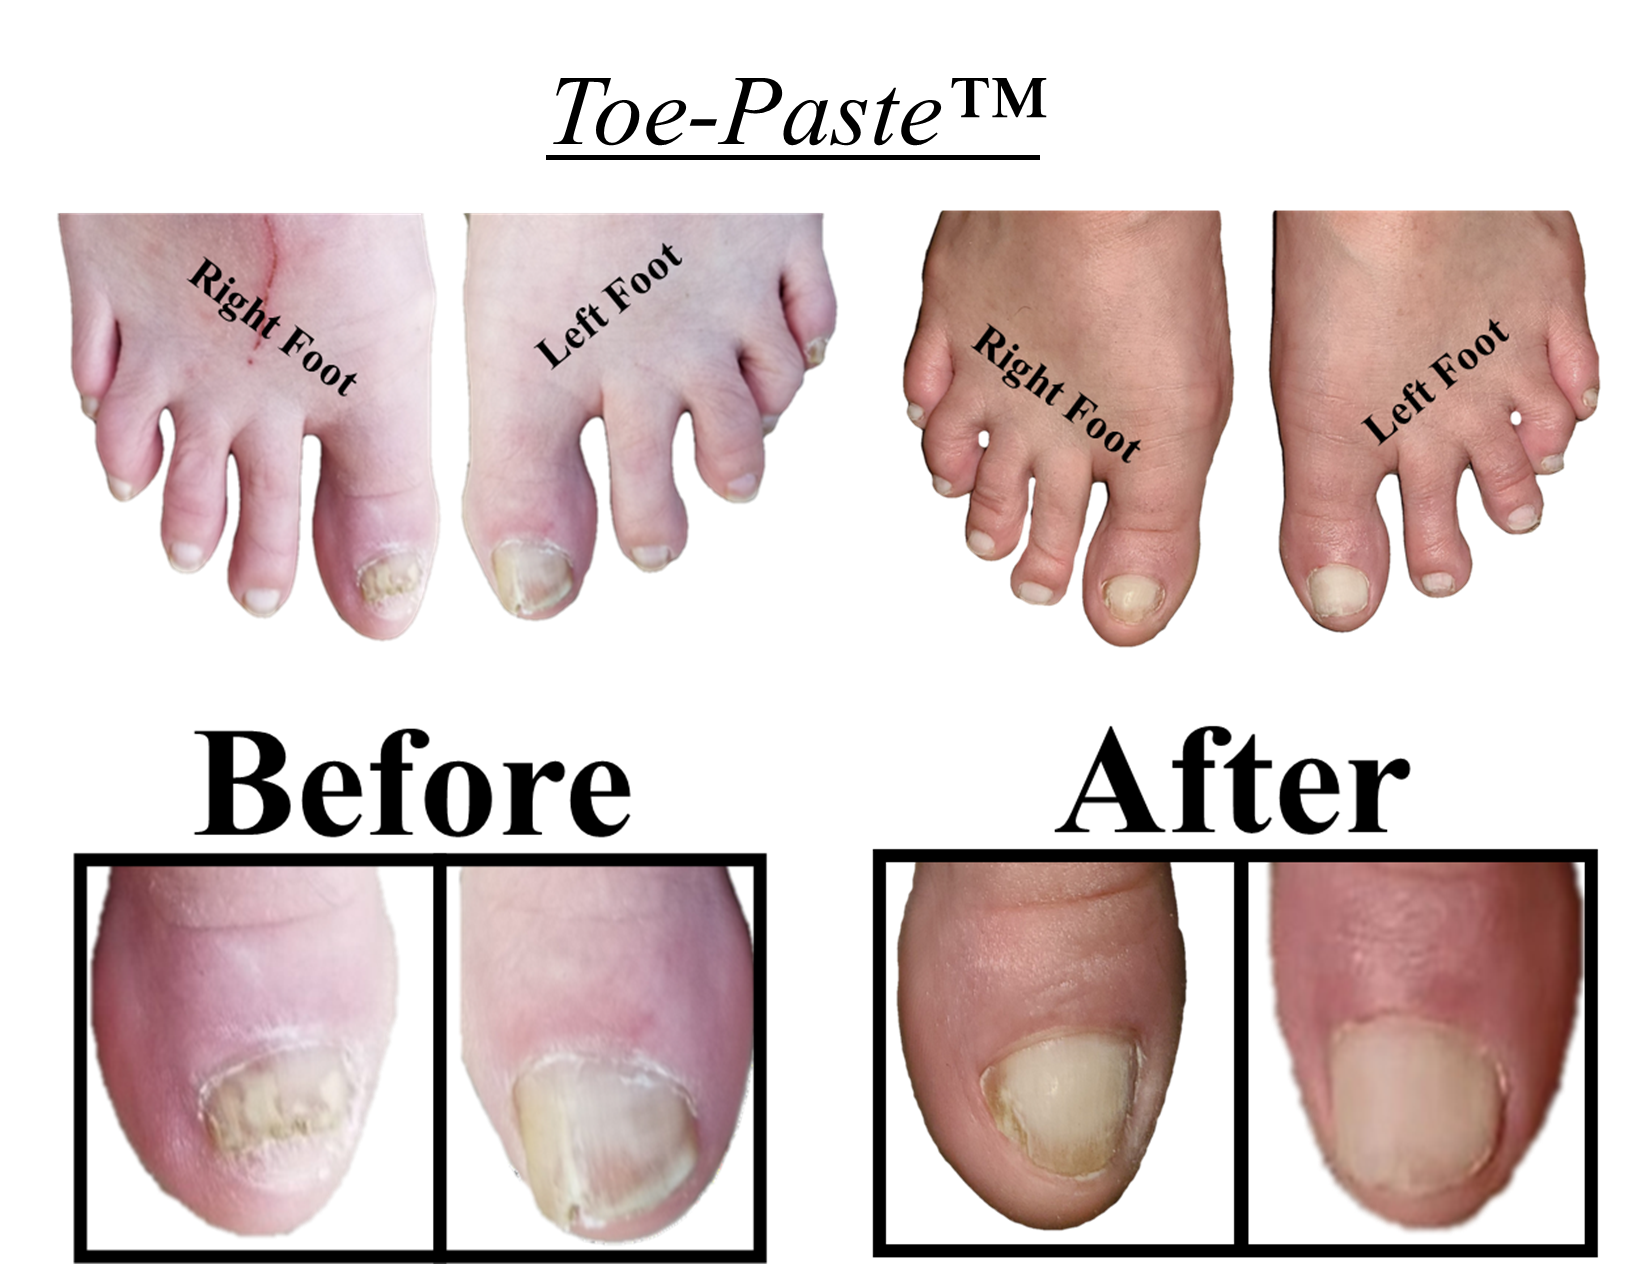 Recognising And Treating Onychomycosis (Fungal Nail)